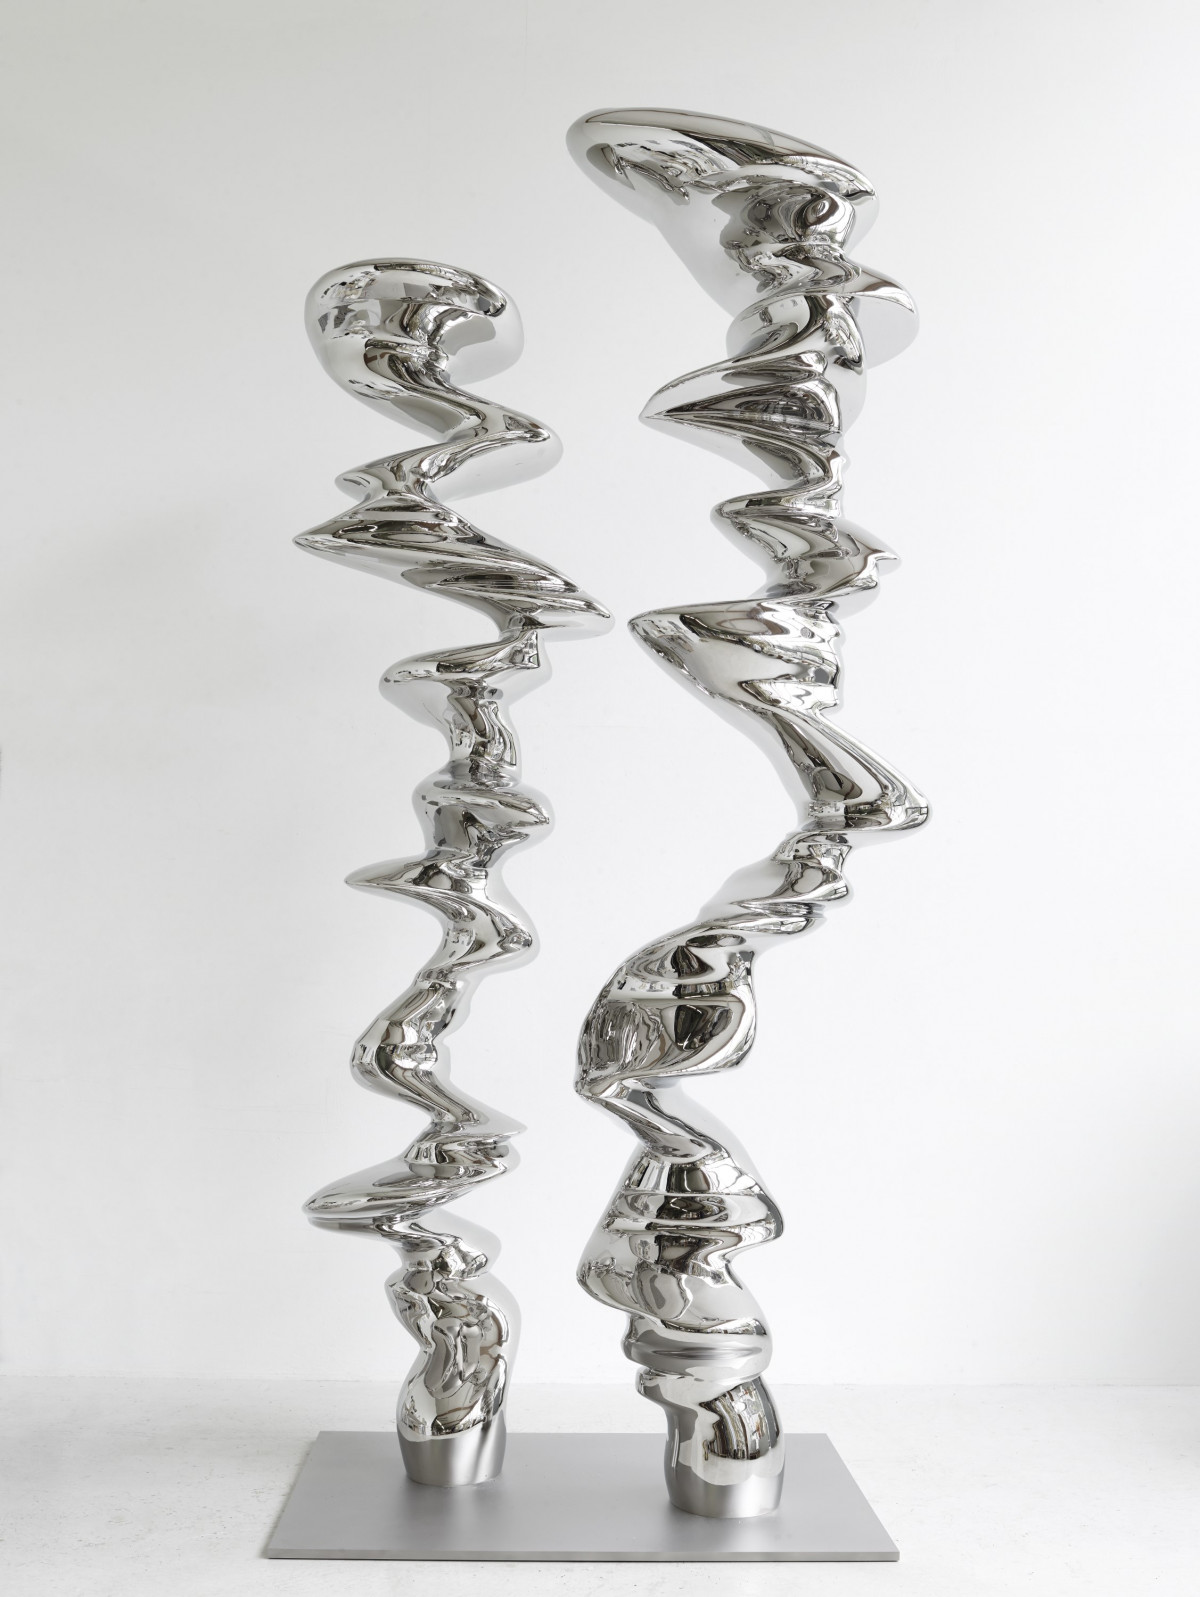 Tony Cragg, ‘Untitled (Pair)’, 2020, Stainless steel